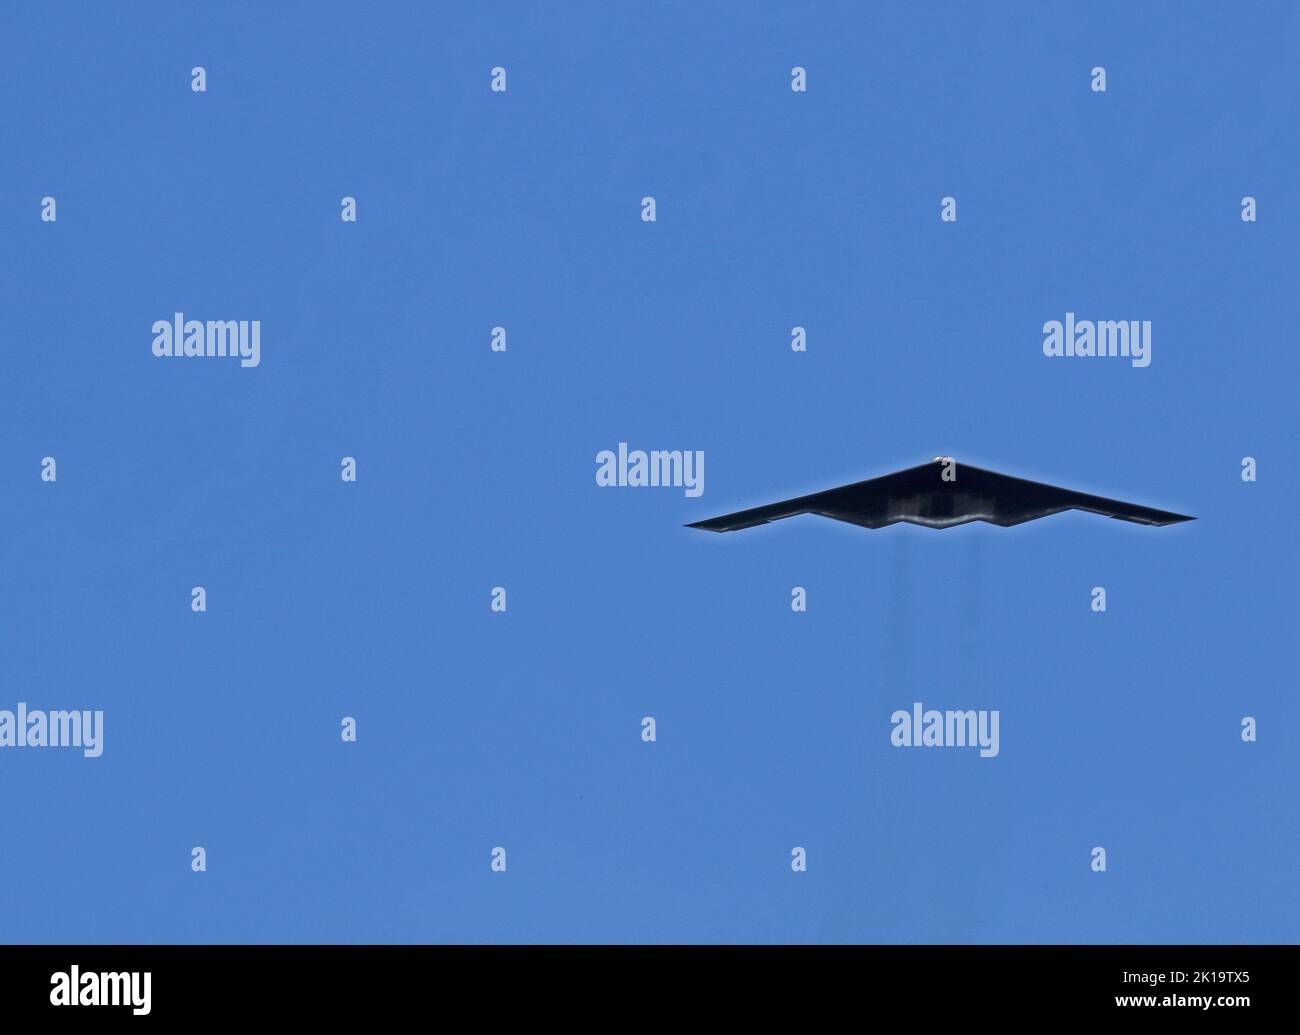 A B-2 Stealth Bomber based at Whiteman Air Force Base in Jefferson County, Mo. flies over the Kansas Speedway before the Hollywood Casino 400 presented by Barstool Sportsbook at the 1.5-mile tri-oval speedway in Kansas City, Kan., Sept. 11, 2022. (U.S. Army Reserve photo by Sgt. 1st Class Clinton Wood, 88th Readiness Division). Stock Photo